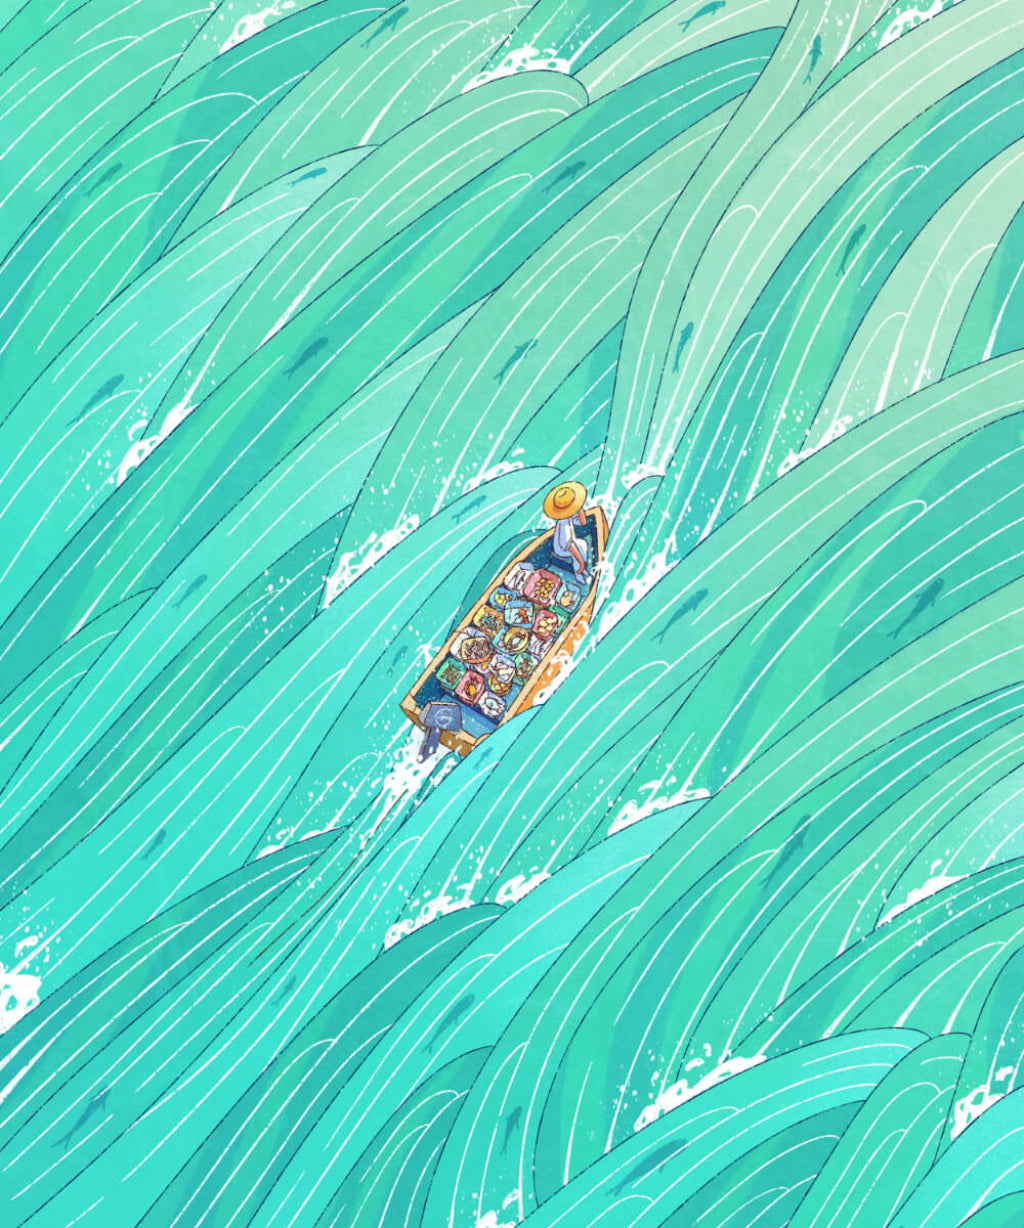 Teal wave lines and small orange boat